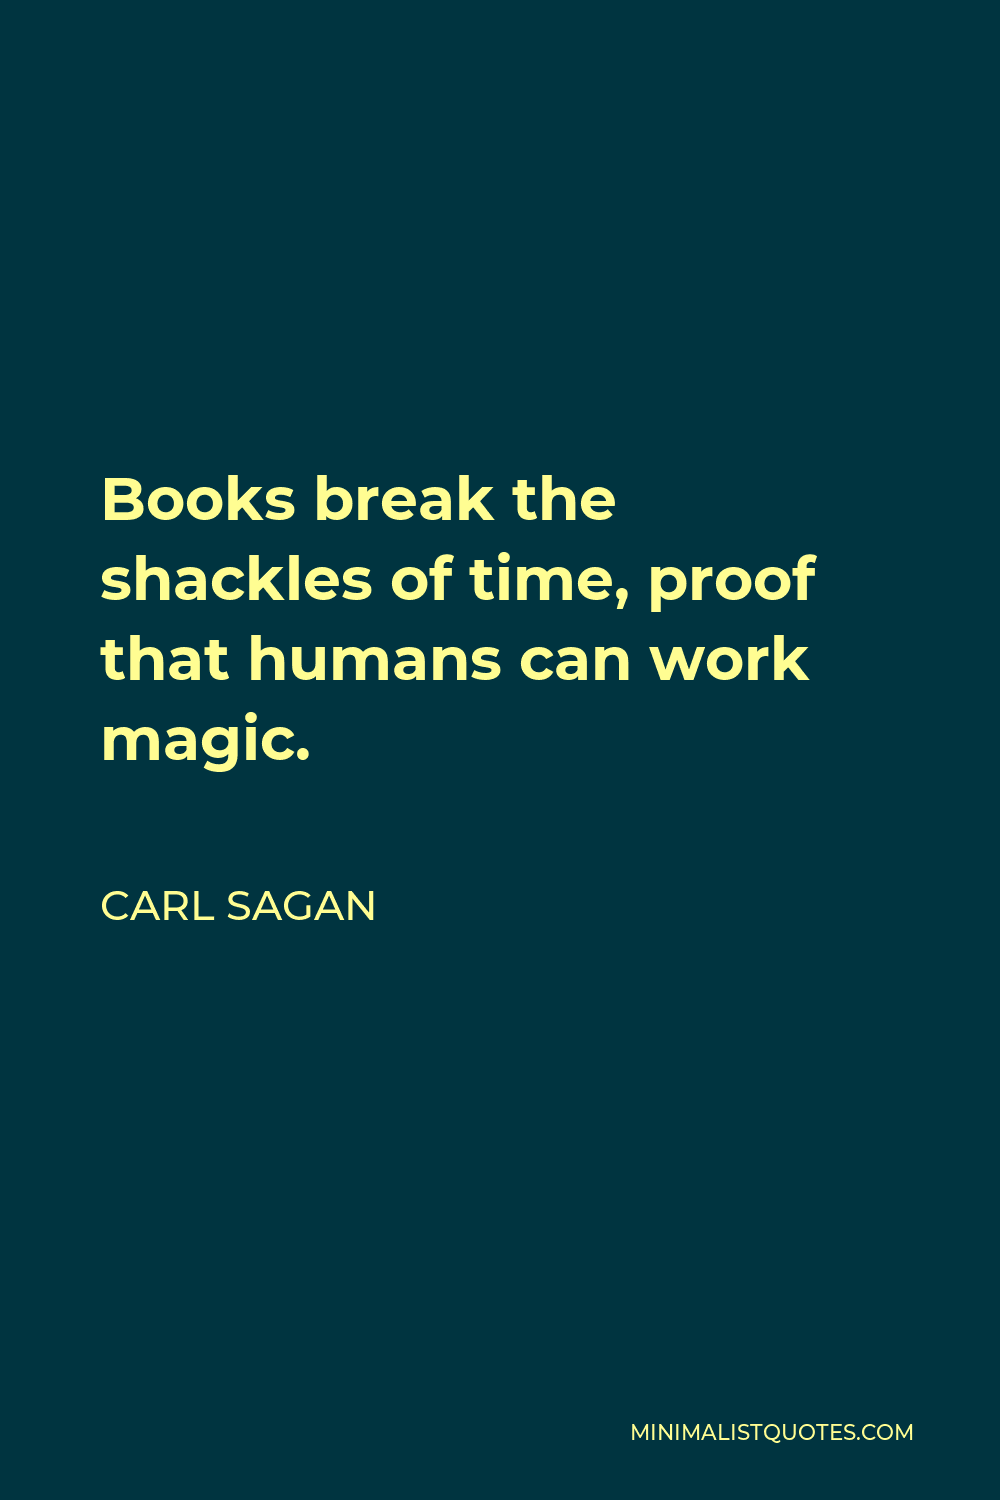 Carl Sagan Quote - Books break the shackles of time, proof that humans can work magic.